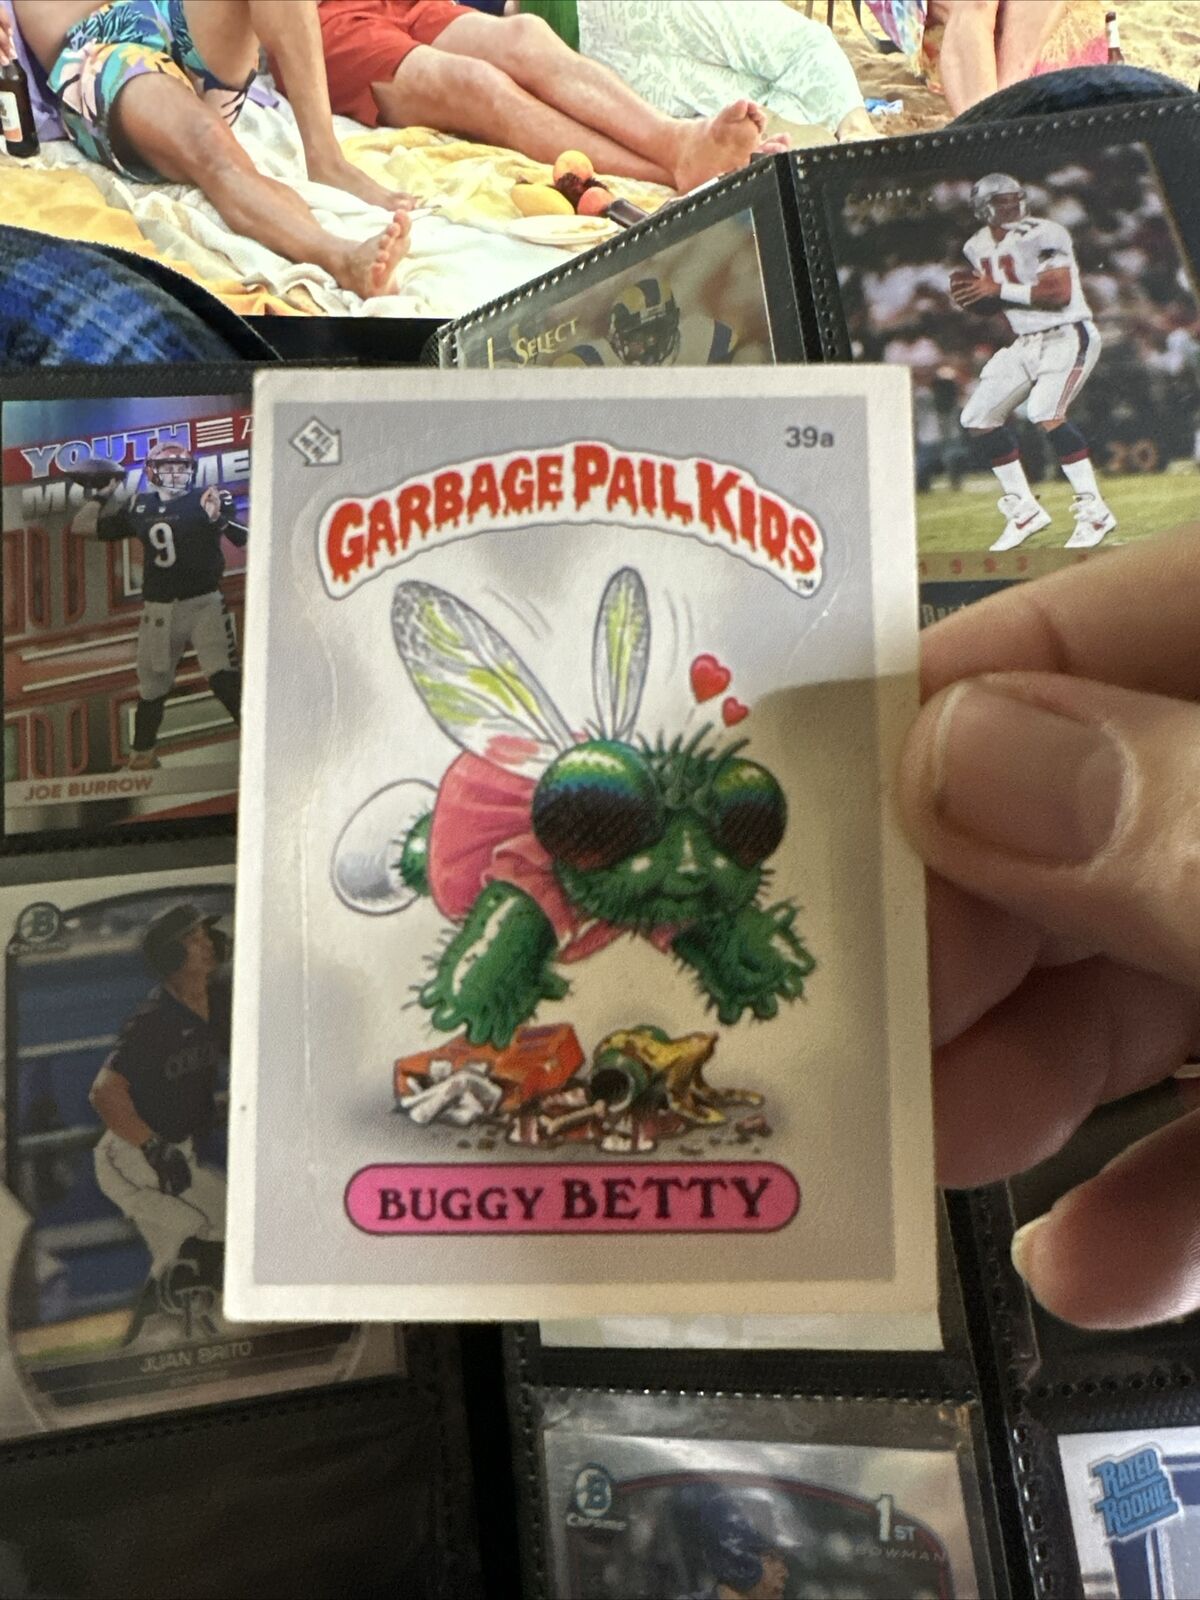 1985 Topps Garbage pail kids sticker card Buggy Betty 39a series 1 A